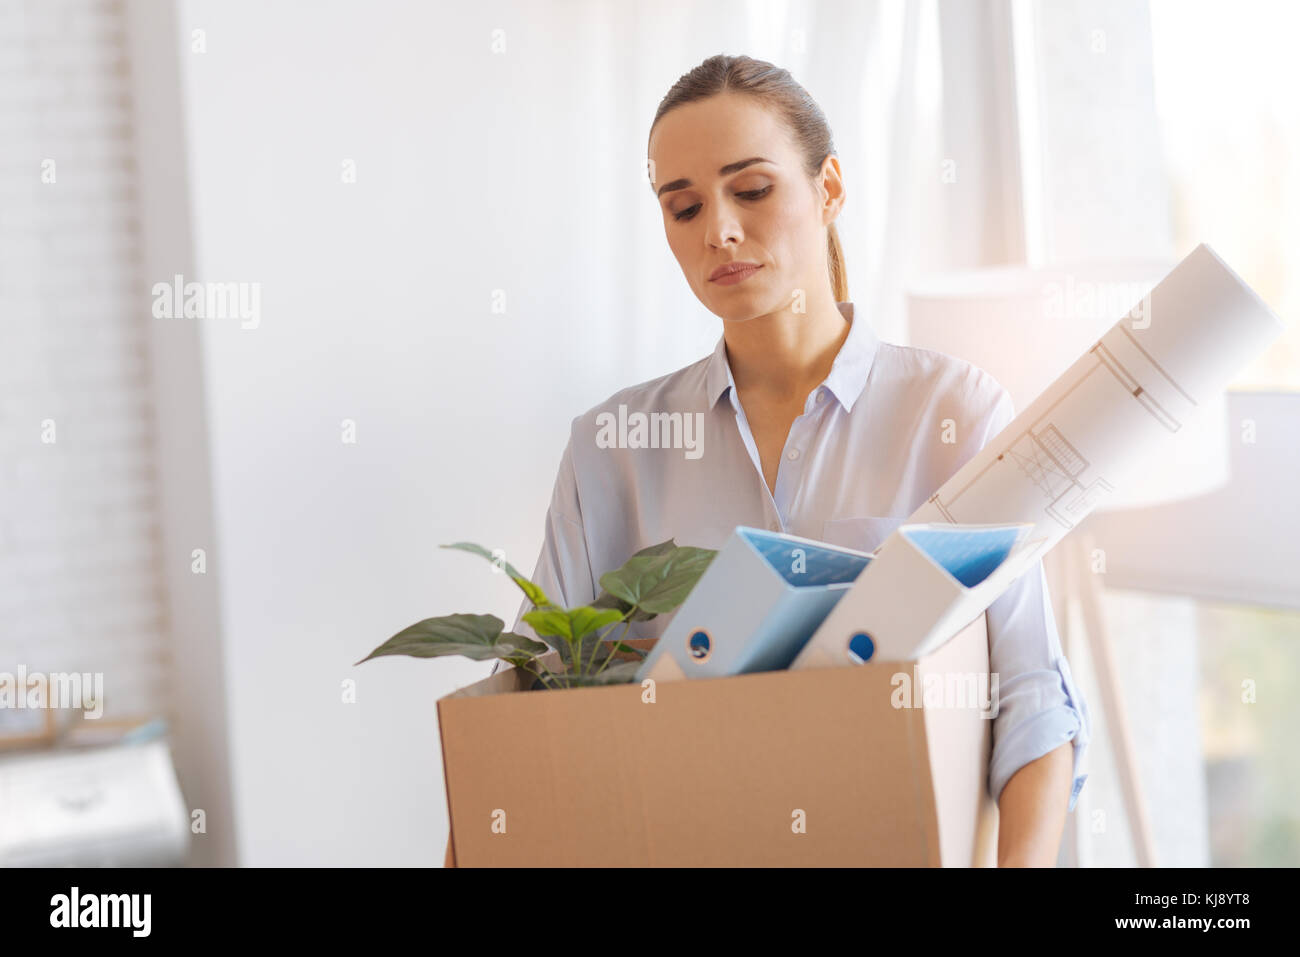 Calm tired woman coming home after being dismissed from work Stock Photo